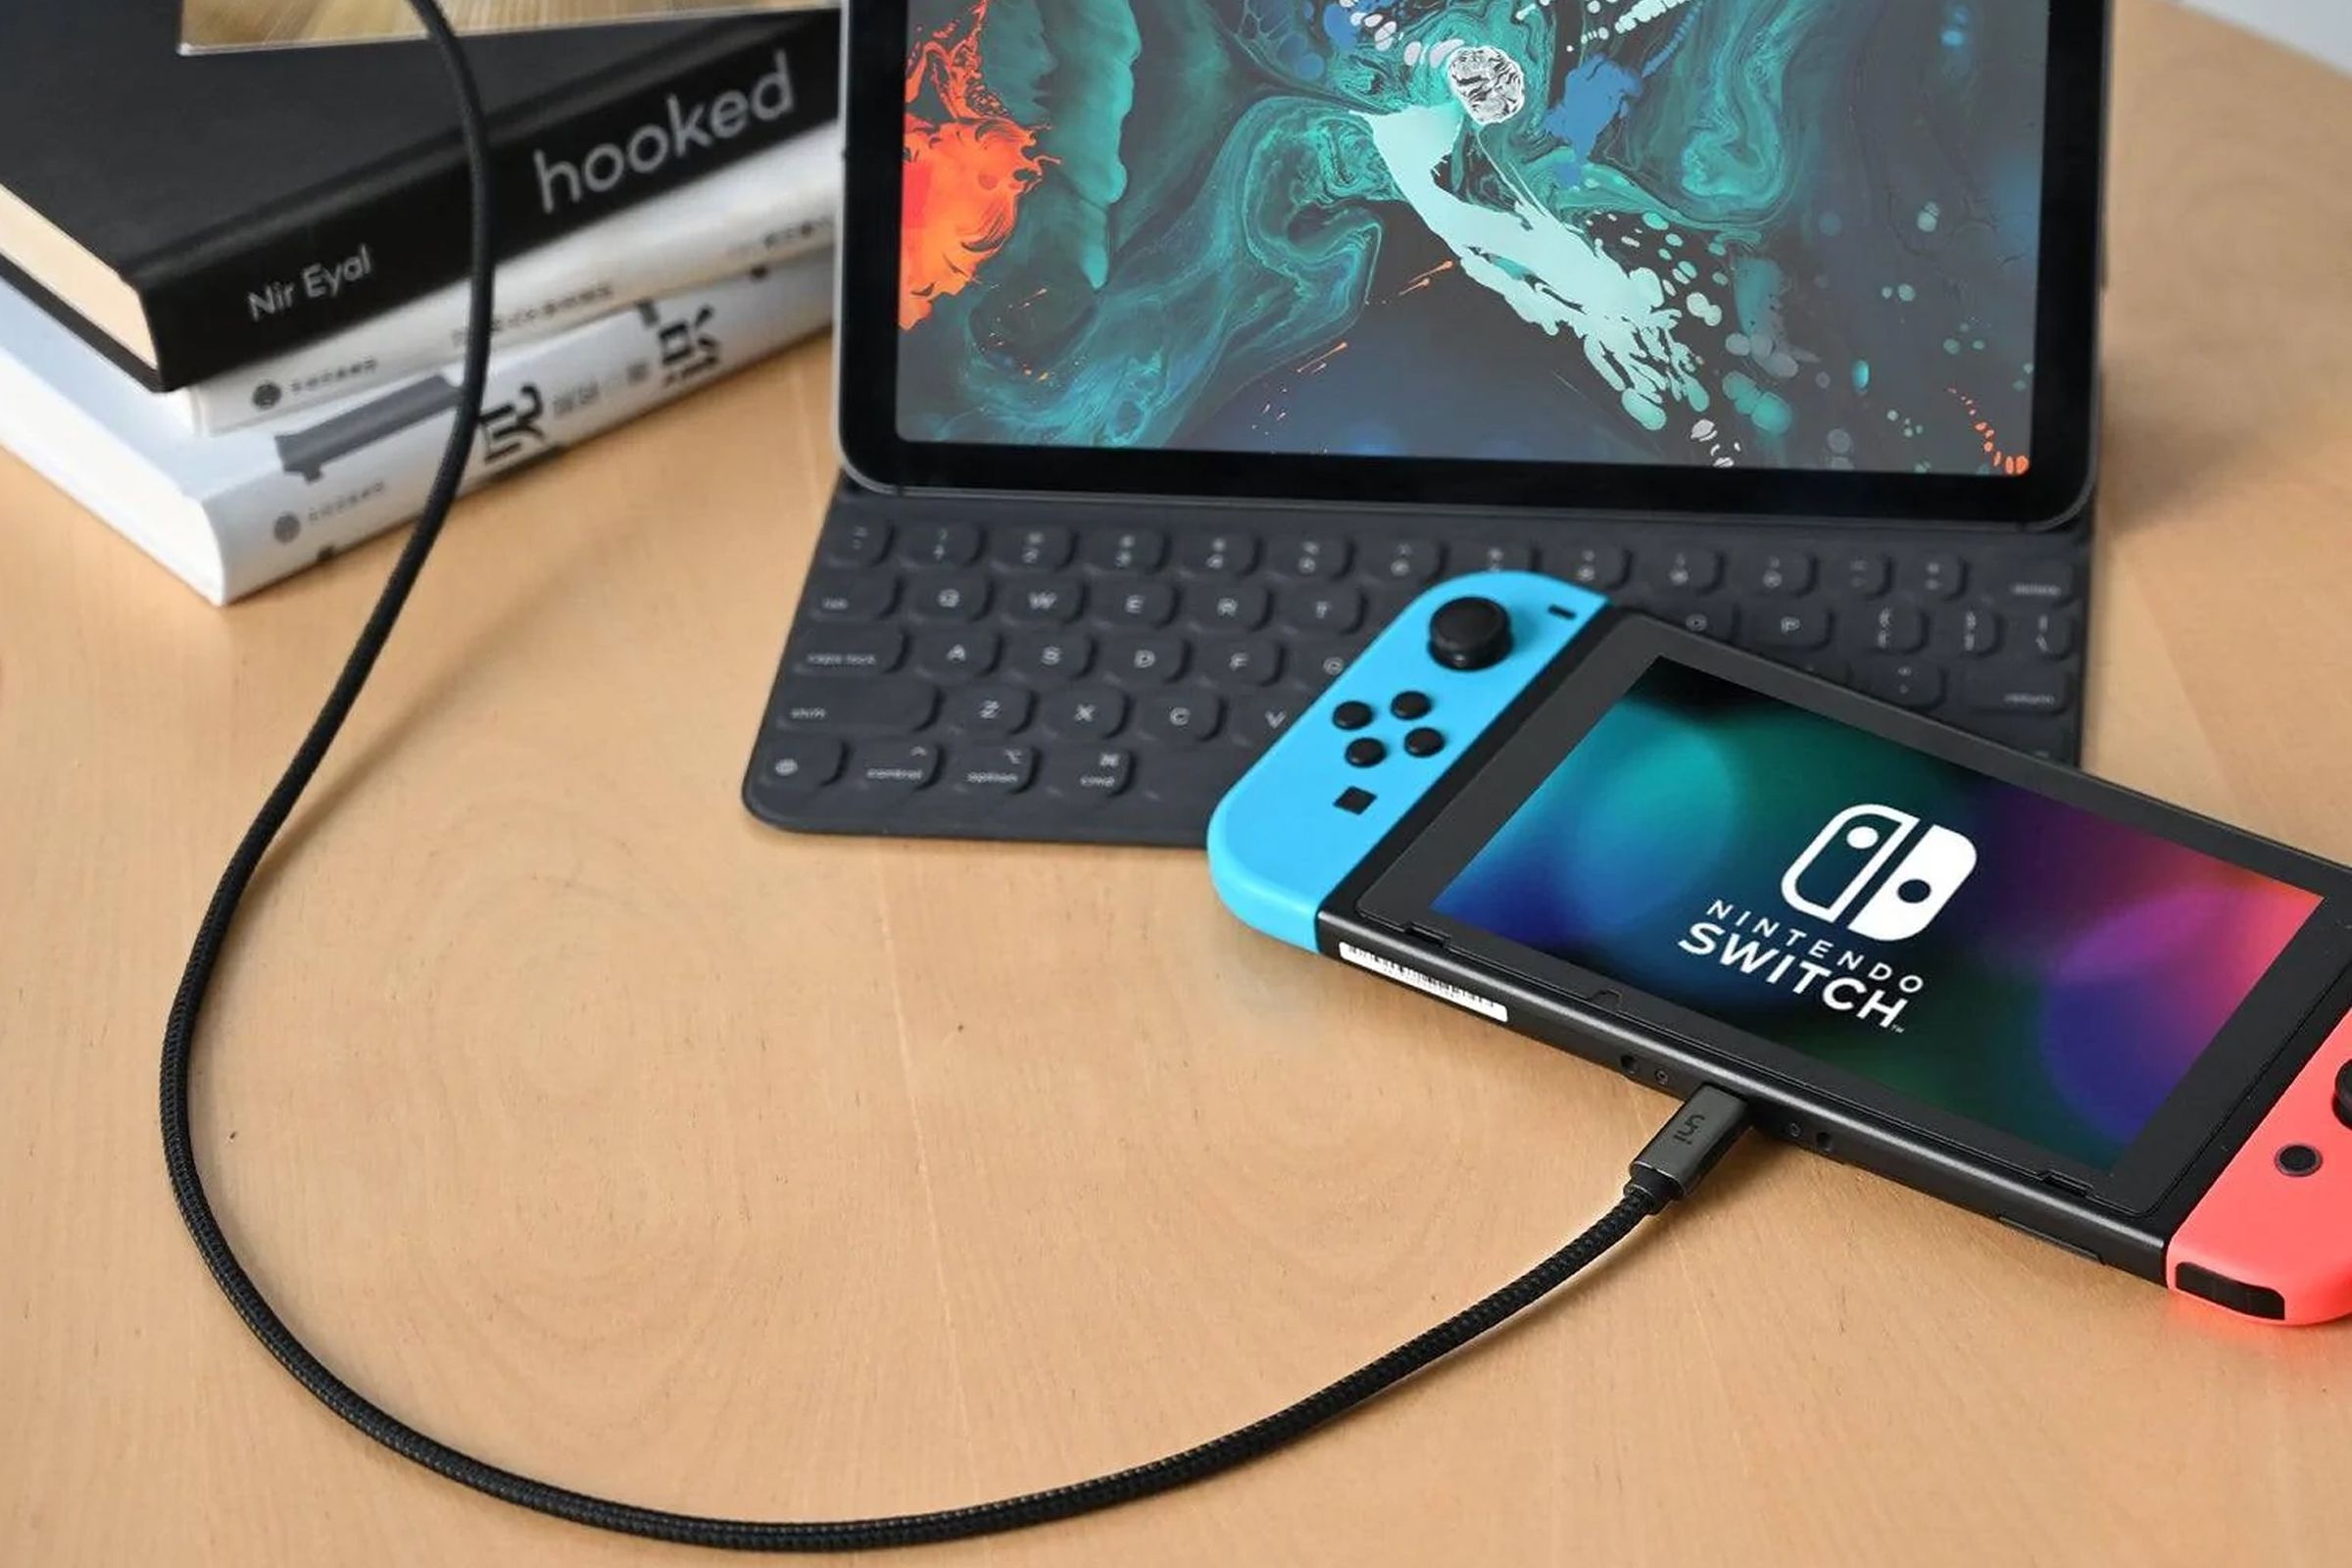 A great, lengthy USB-C cable is just too handy to be without. And once you have one you soon find a need for having more than one, like playing while charging your Nintendo Switch or PlayStation DualSense controller.